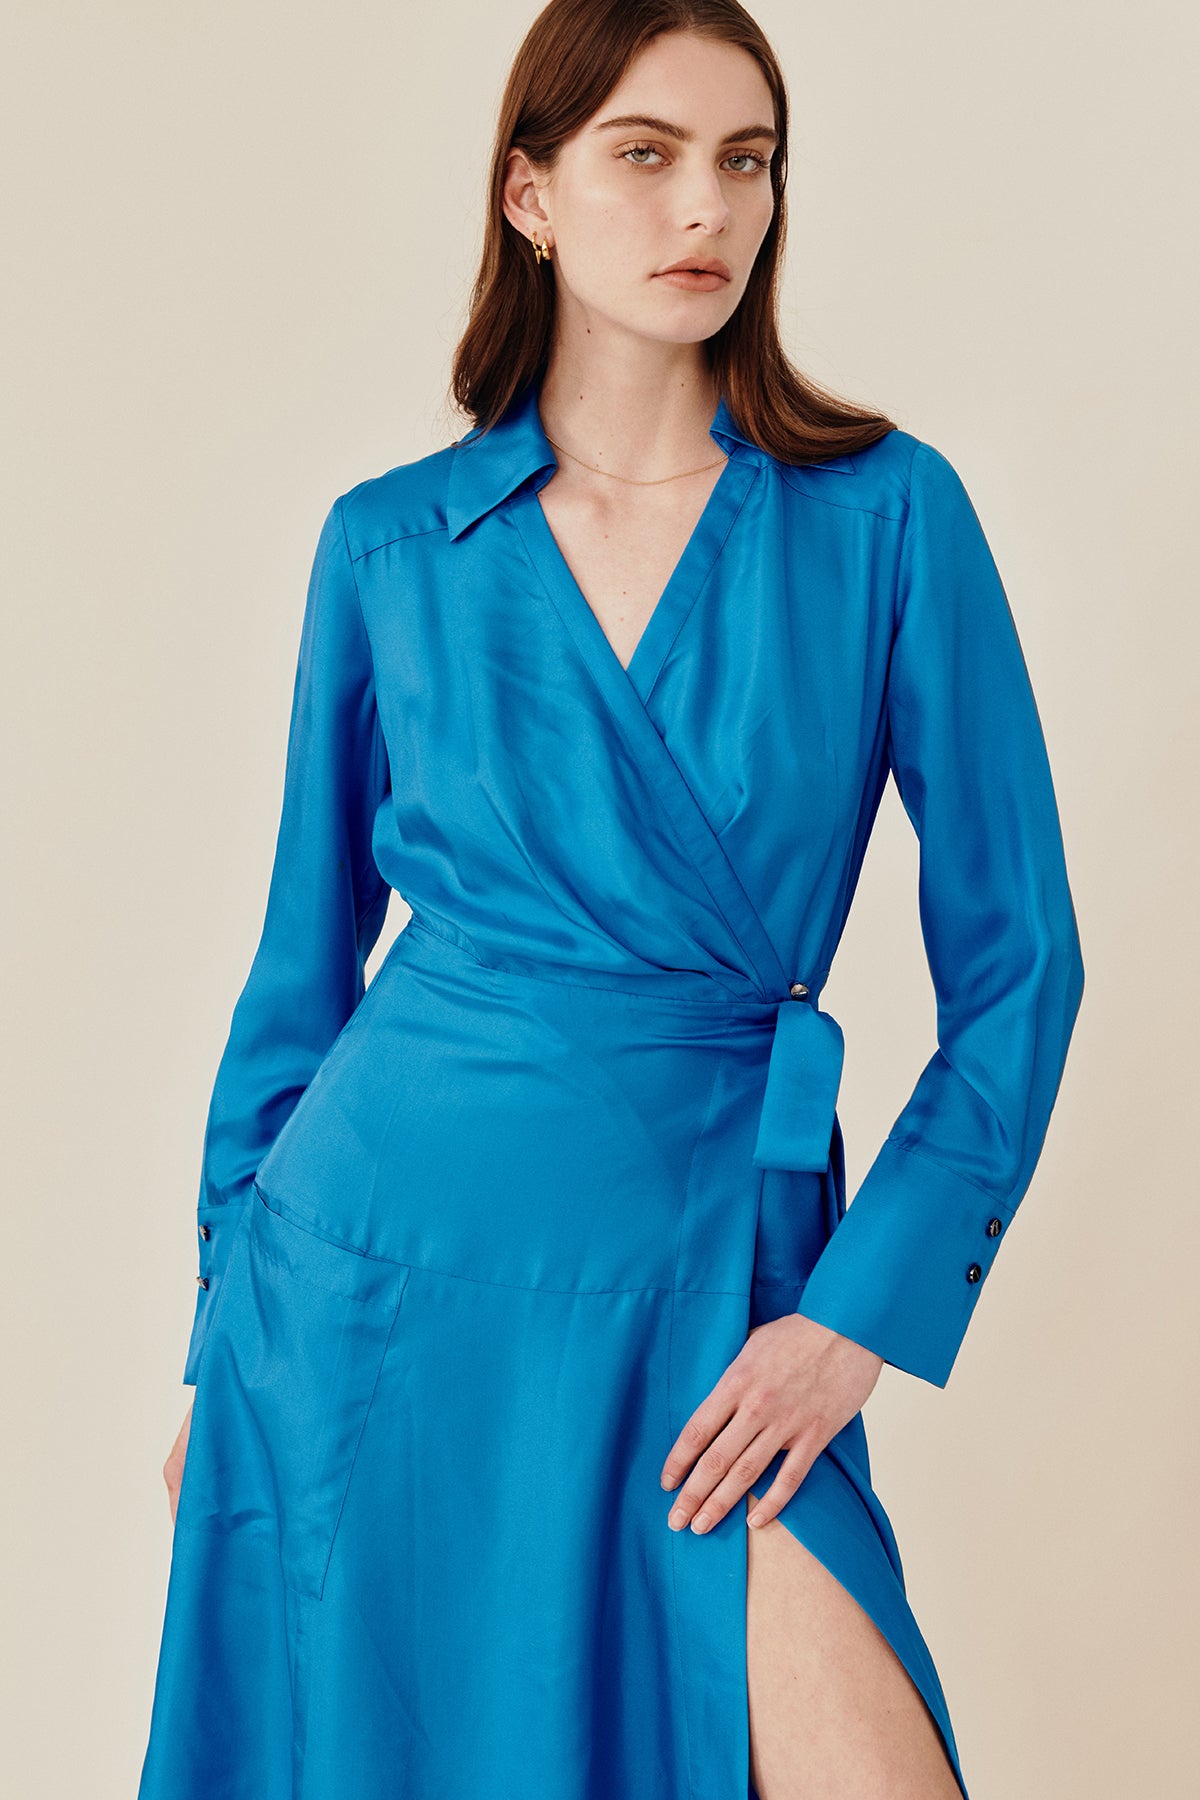 Model wearing Australian fashion designer GINGER & SMARTS' blue silk Libertine that is the classic wrap silhouette that features a sharp collar and gently flared skirt with a long shirt sleeve.  